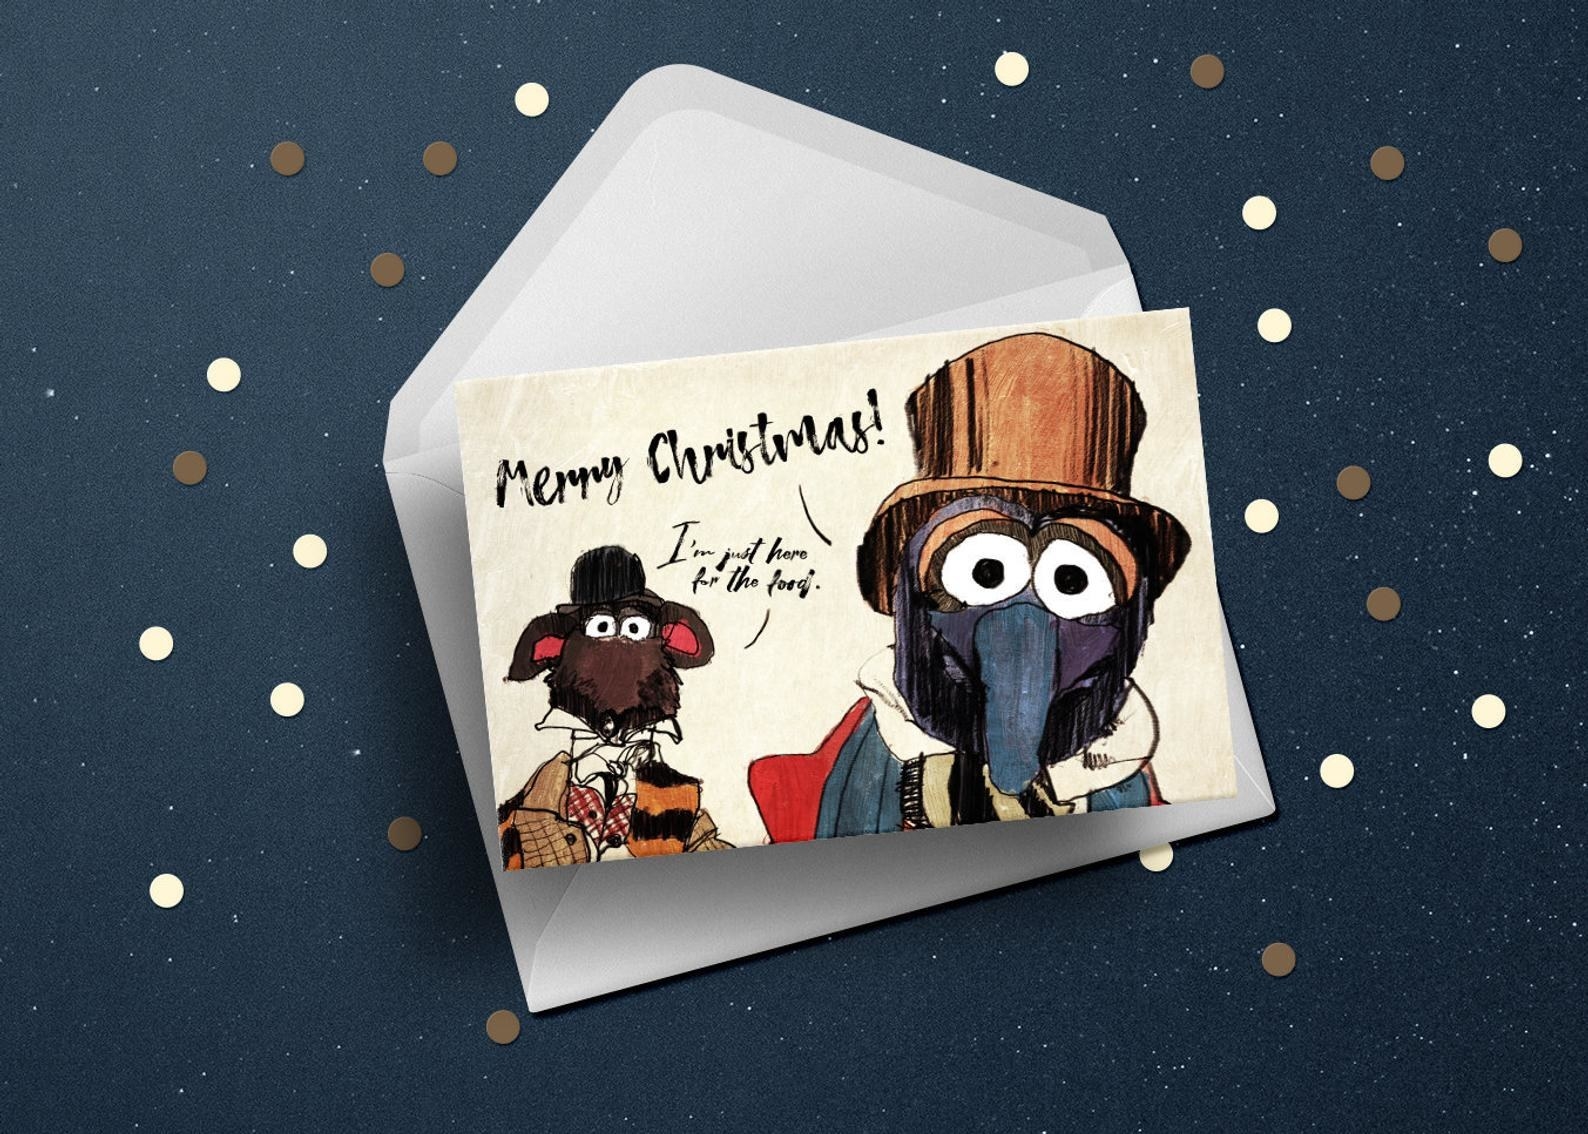 the greeting card